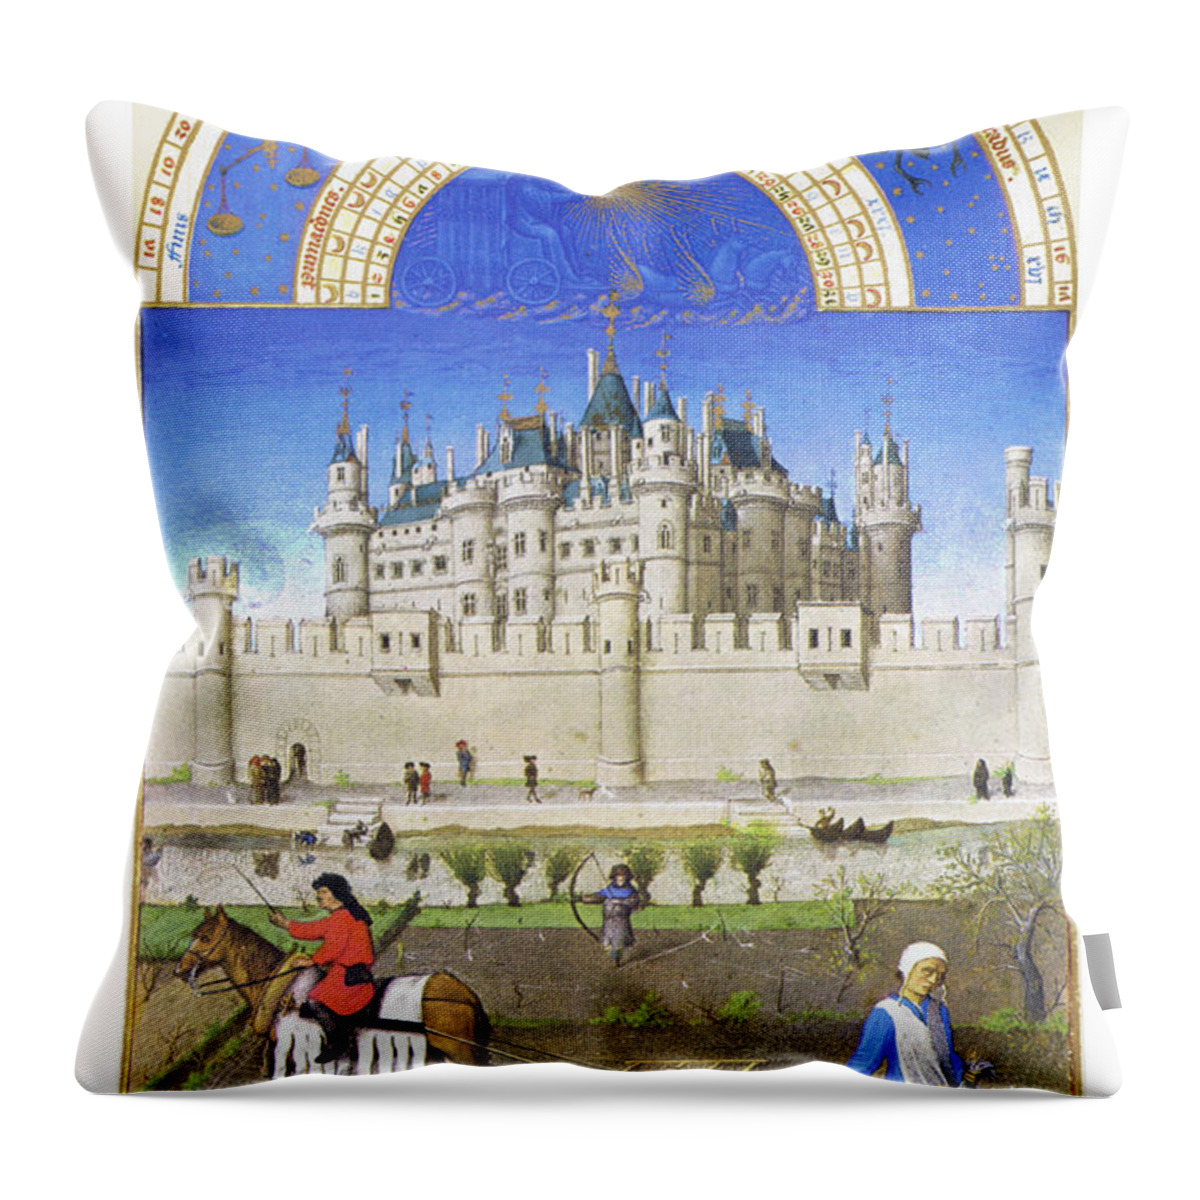 Middle Ages Throw Pillow featuring the painting Le Tres riches heures du Duc de Berry - October by Limbourg brothers